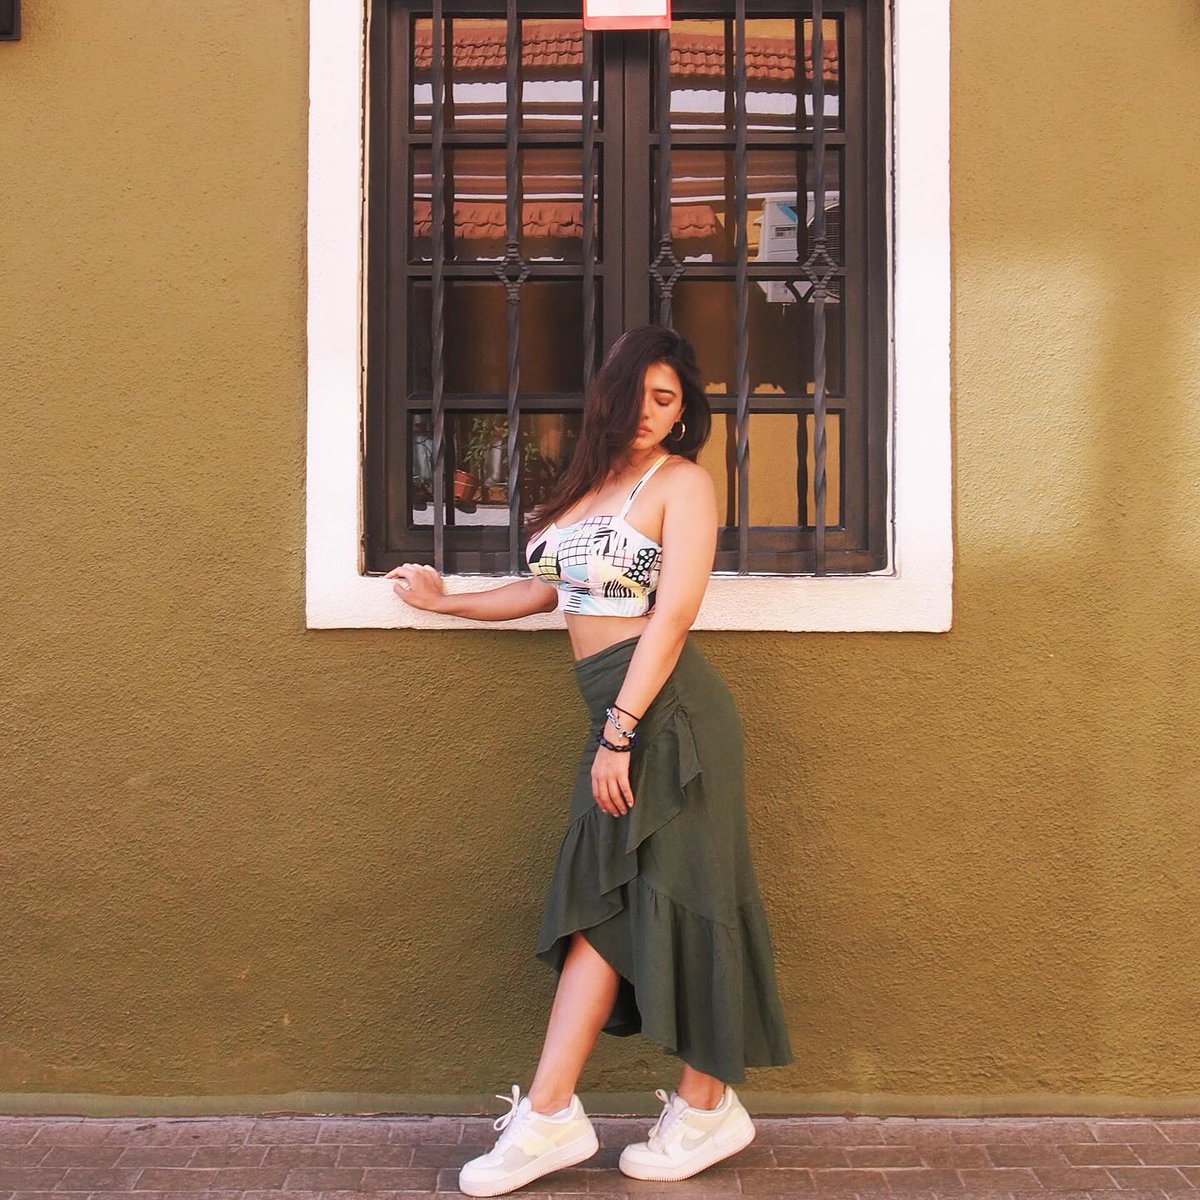 Stepping up the style game with an ultra-hot 🔥 look! @TheKetikaSharma slays in a stunning olive 💚 green skirt 💃 & chic crop top. effortlessly flawless! #KetikaSharma #HittuCinma